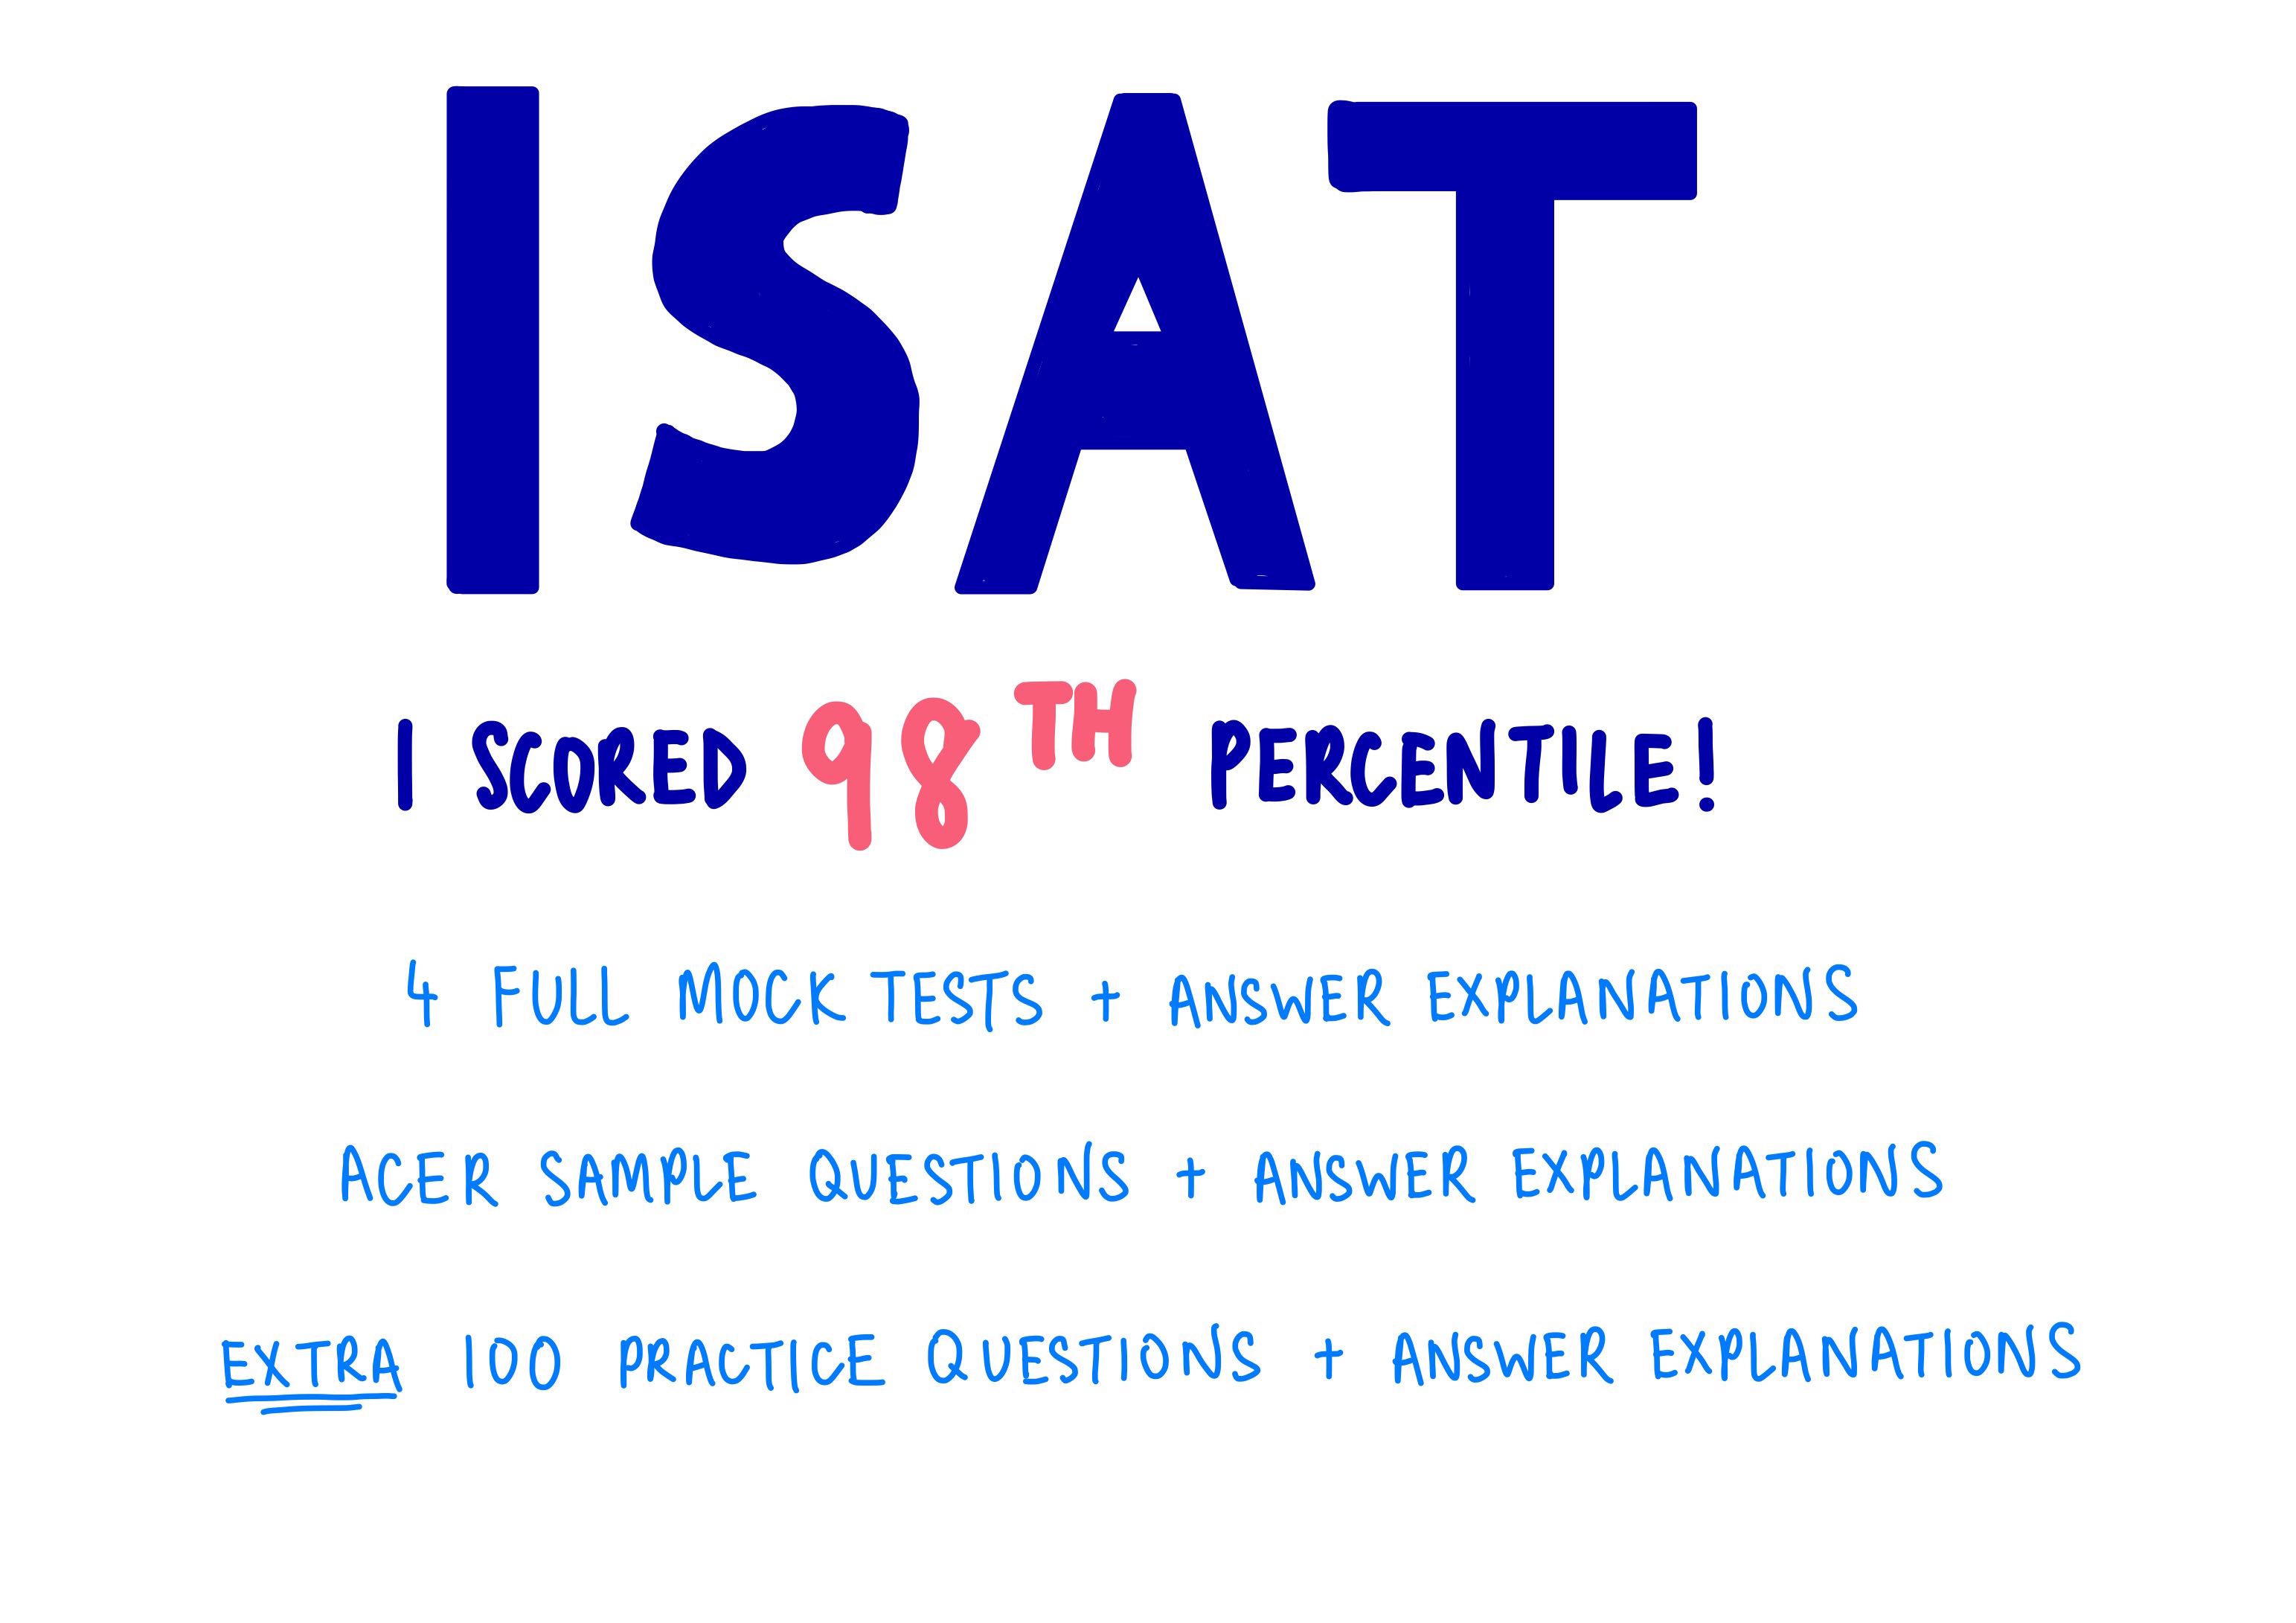 ISAT Preparation Materials Questions Tests Practices Books Stationery Textbooks Tertiary On